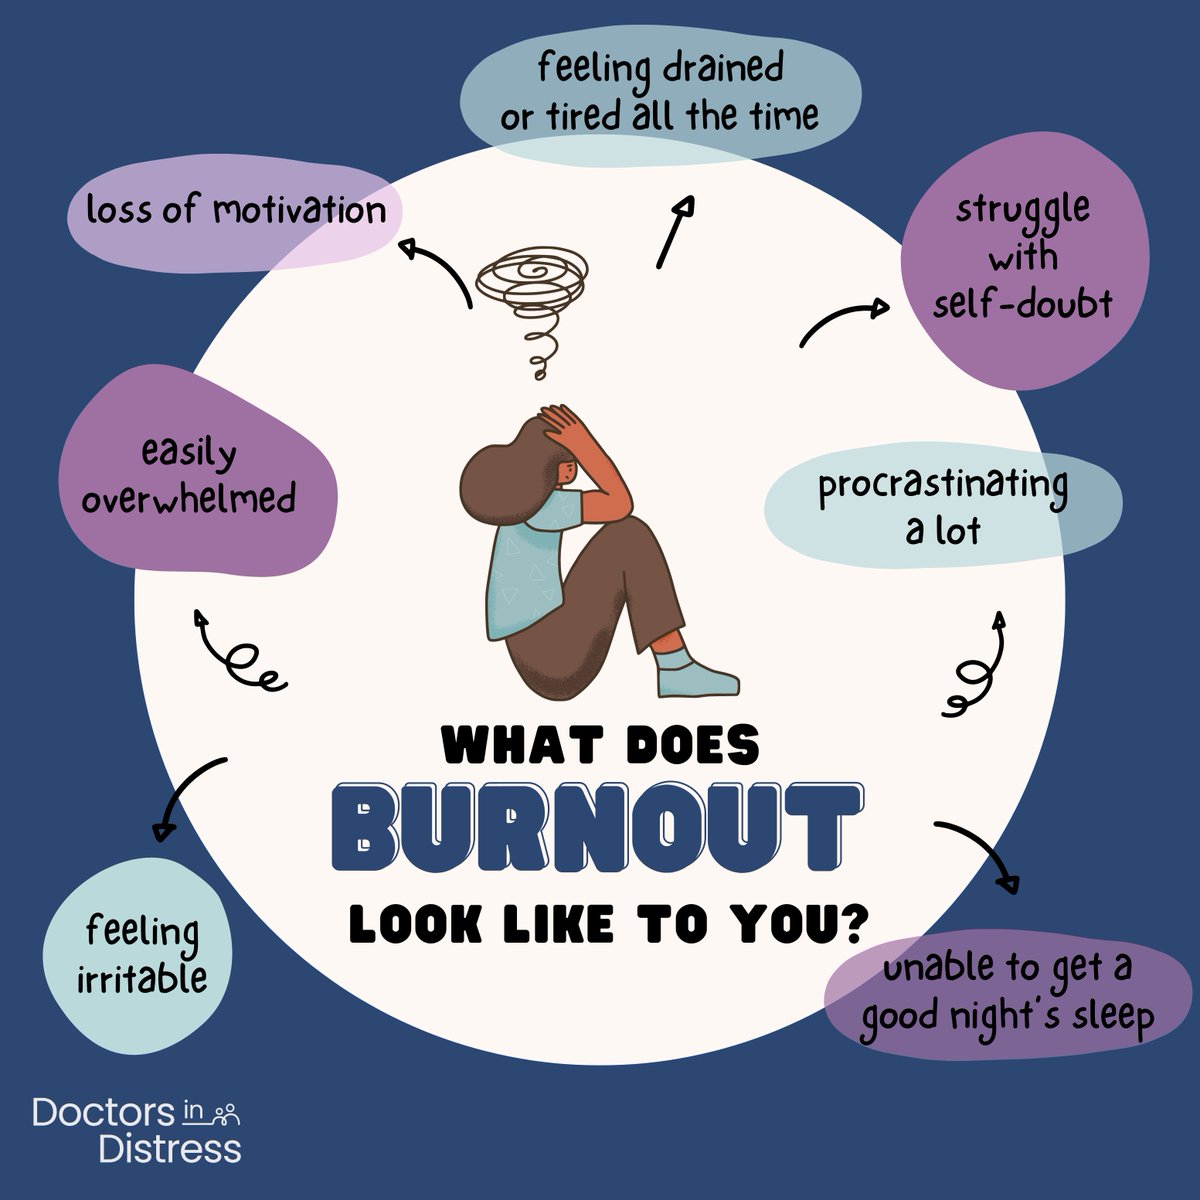 Did you know that almost a third of healthcare staff feel burnt out because of their work? Among the signs for burn out are feeling tired or drained all the time, difficulty sleeping, overwhelmed, or feeling isolated. Ambulance staff and nurses are the top two professions in